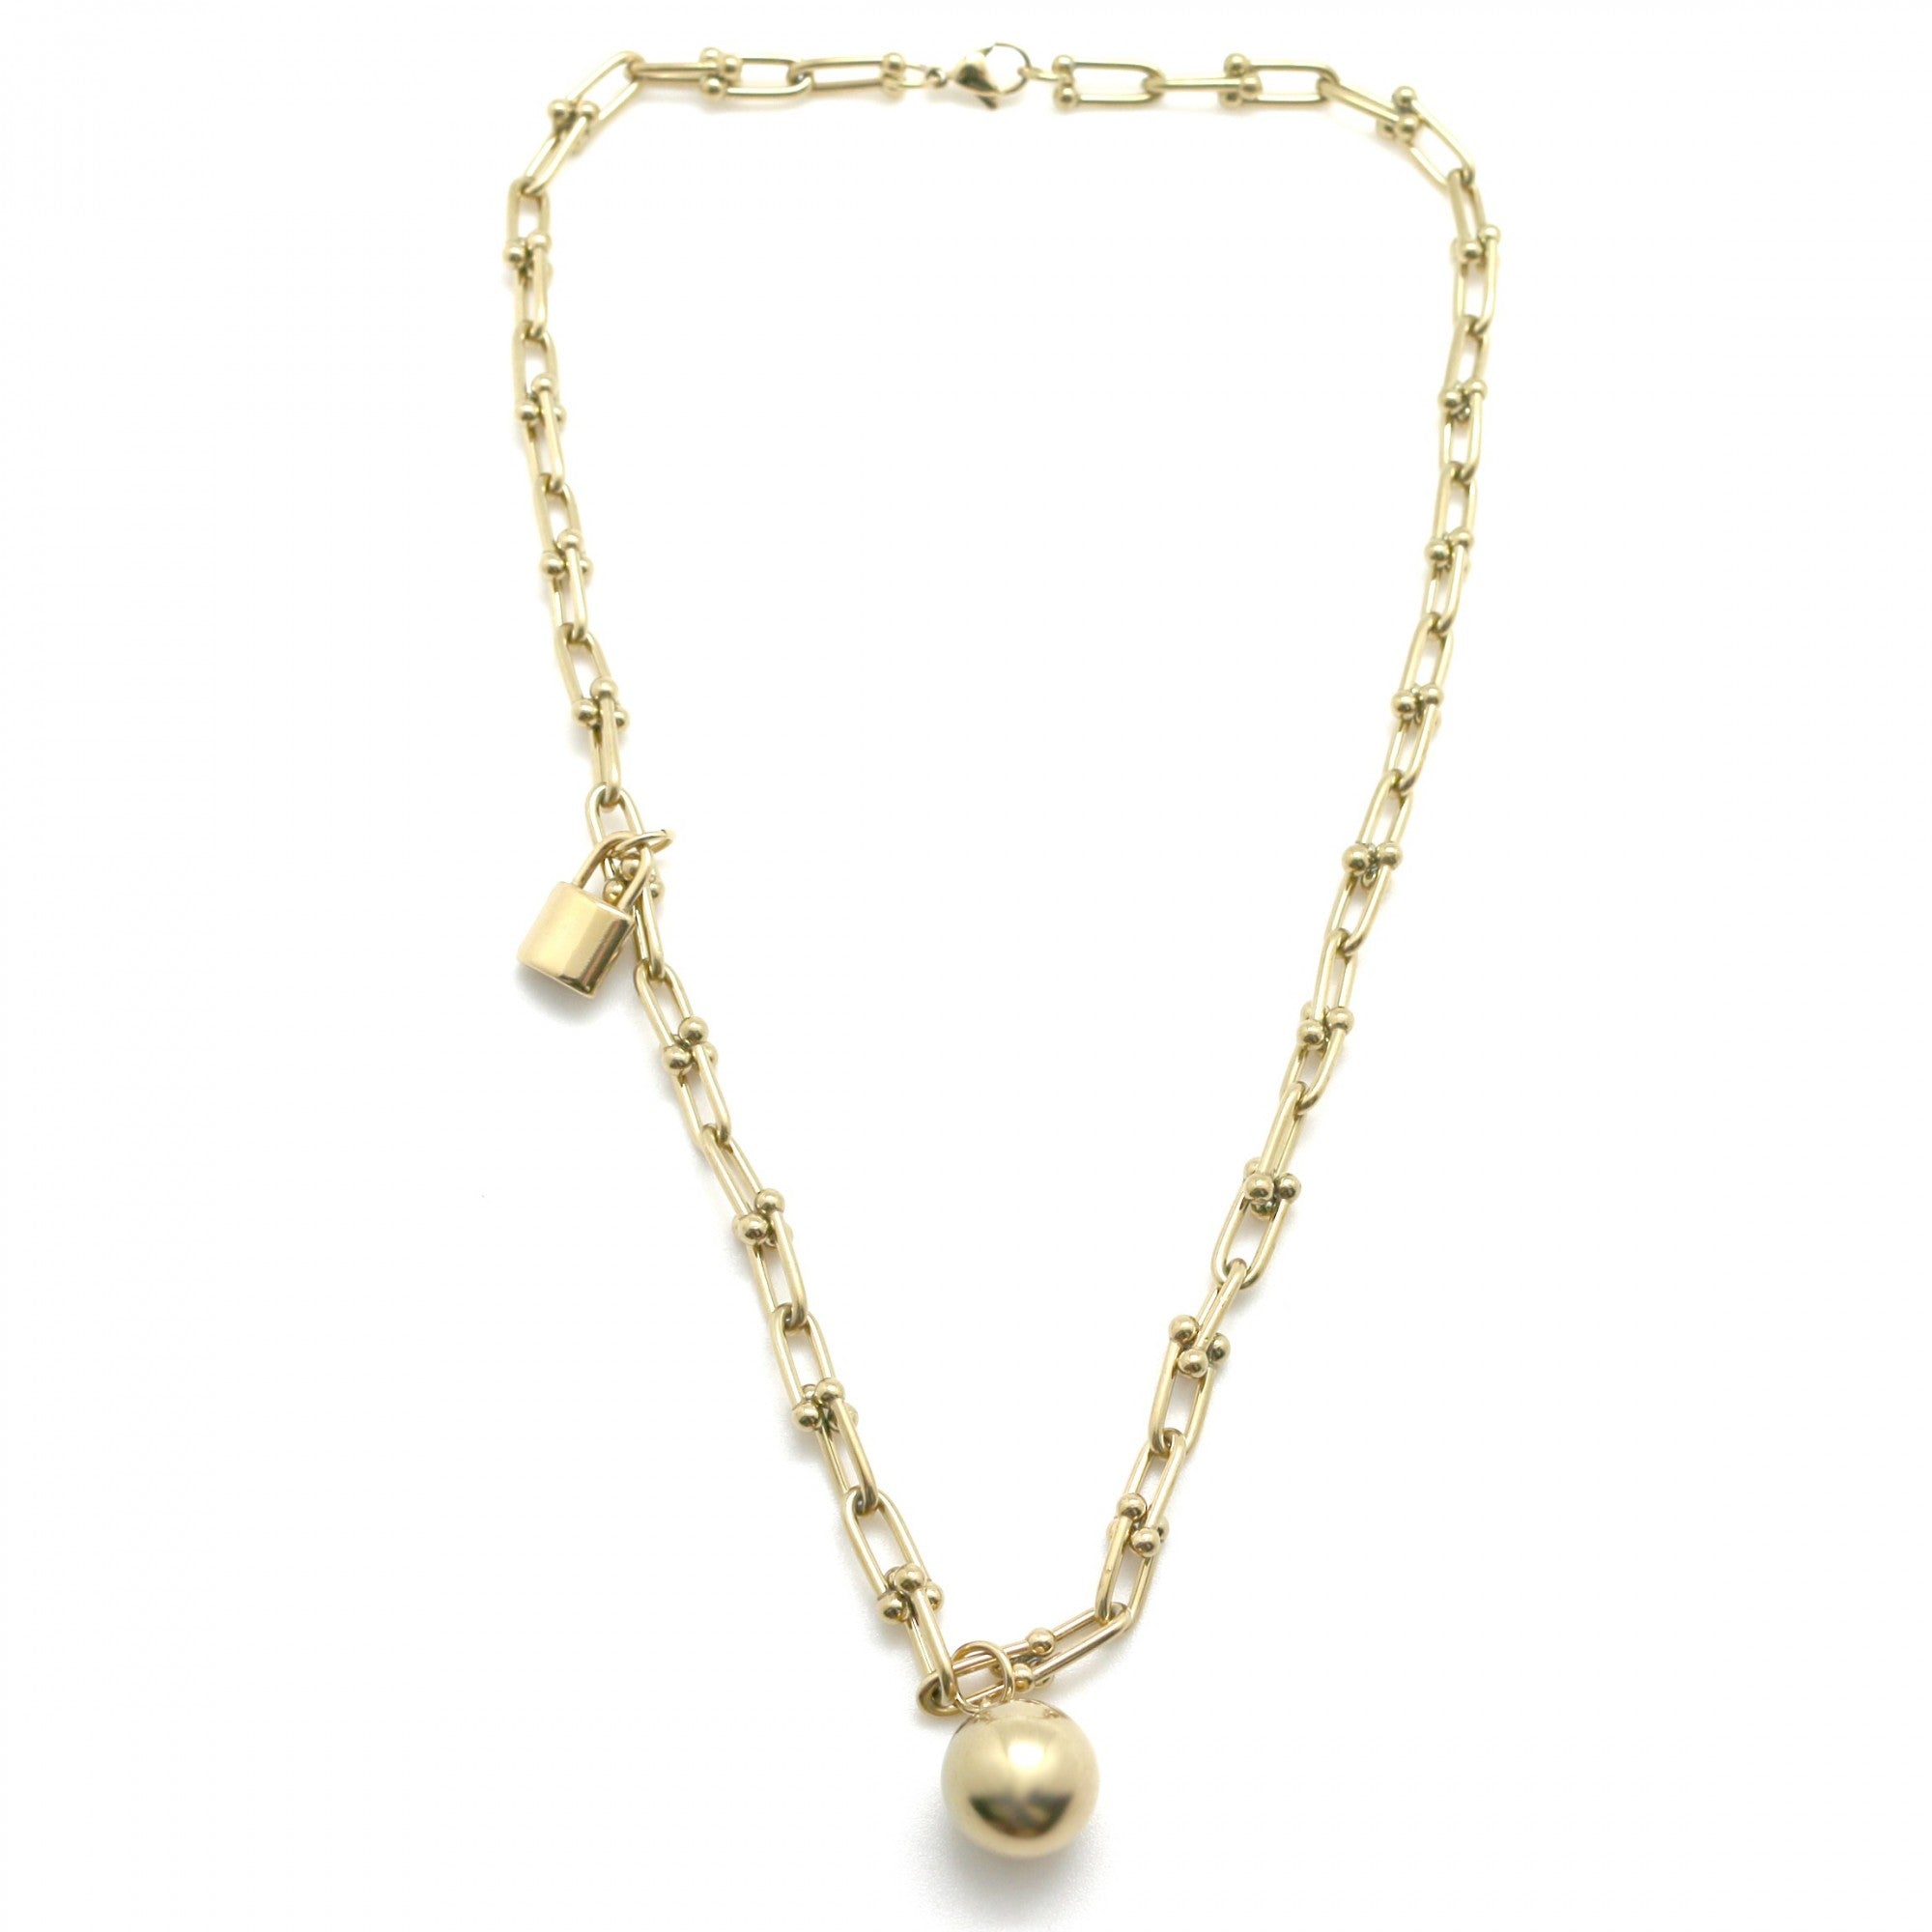 Golden ball link chain necklace